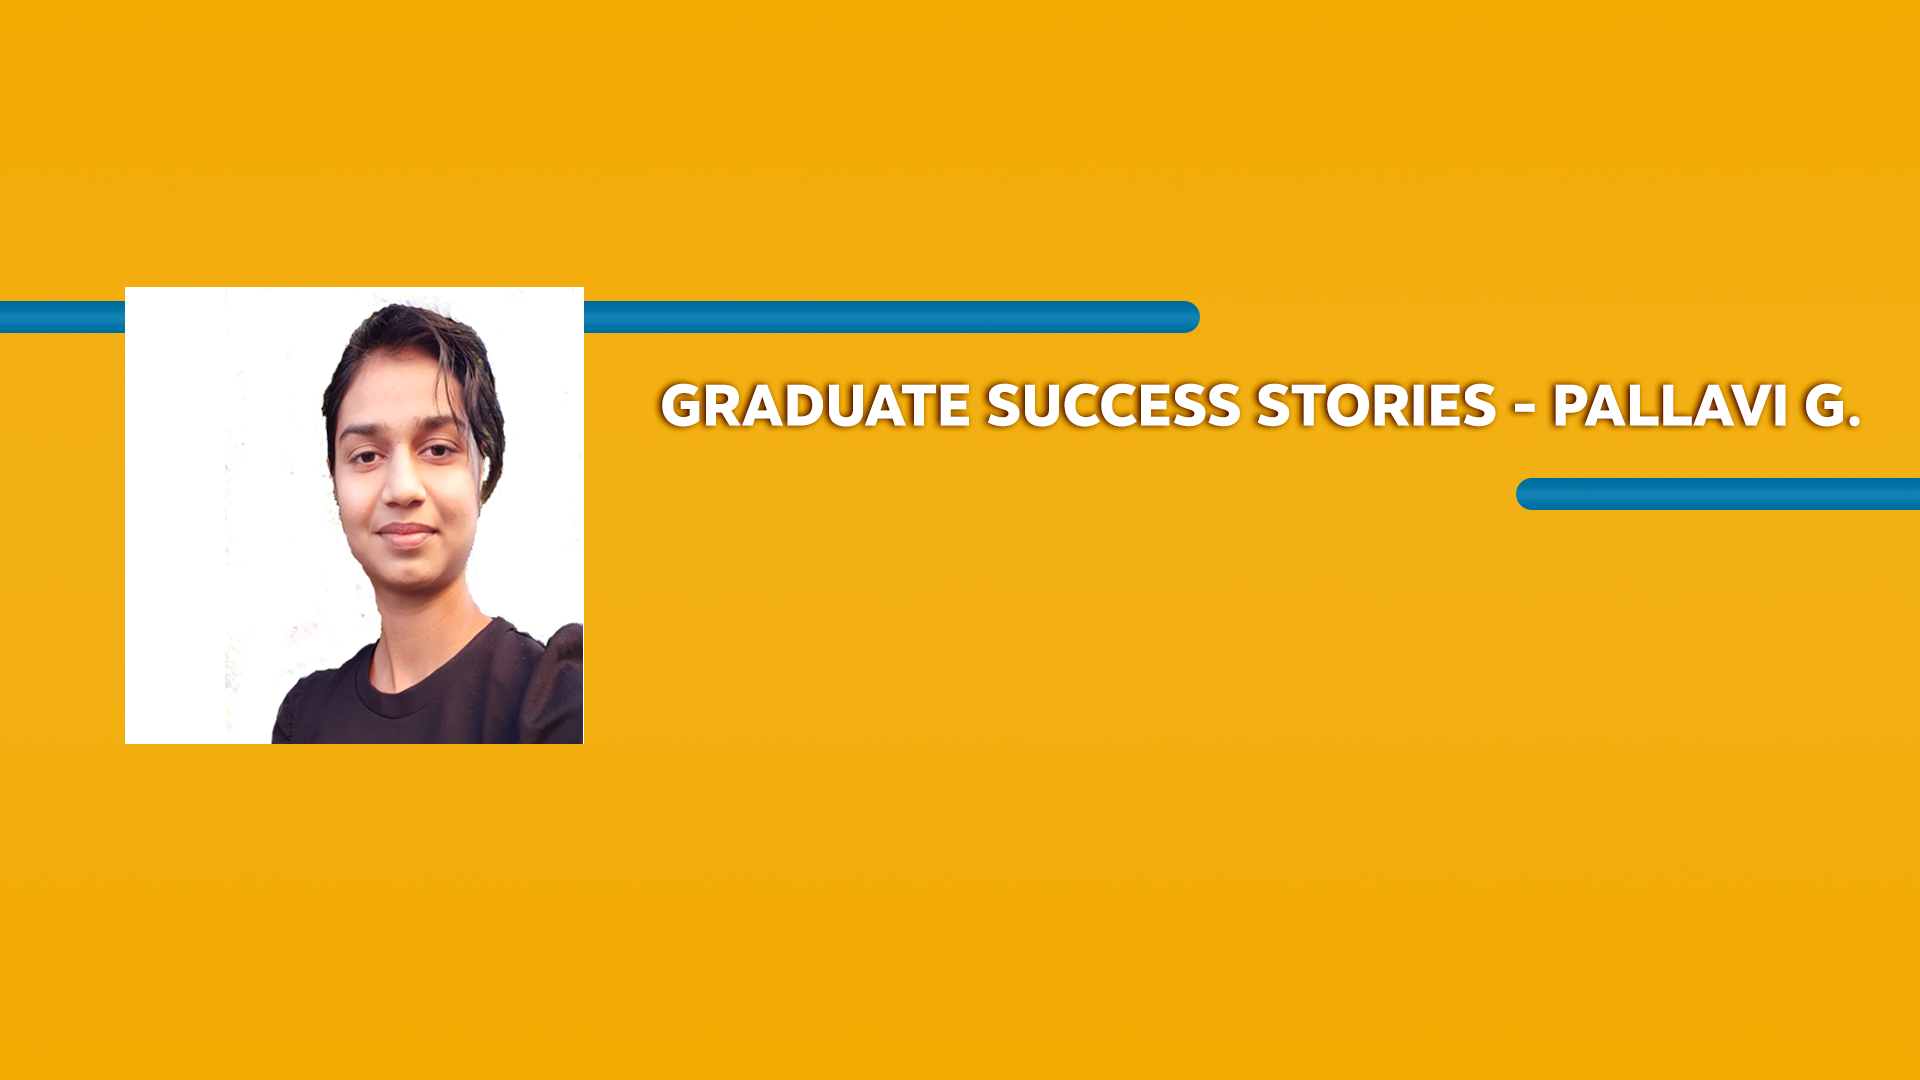 Orange rectangle with a picture of a woman wearing a t-shirt and Graduate Success Stories - Pallavi G. text in white font